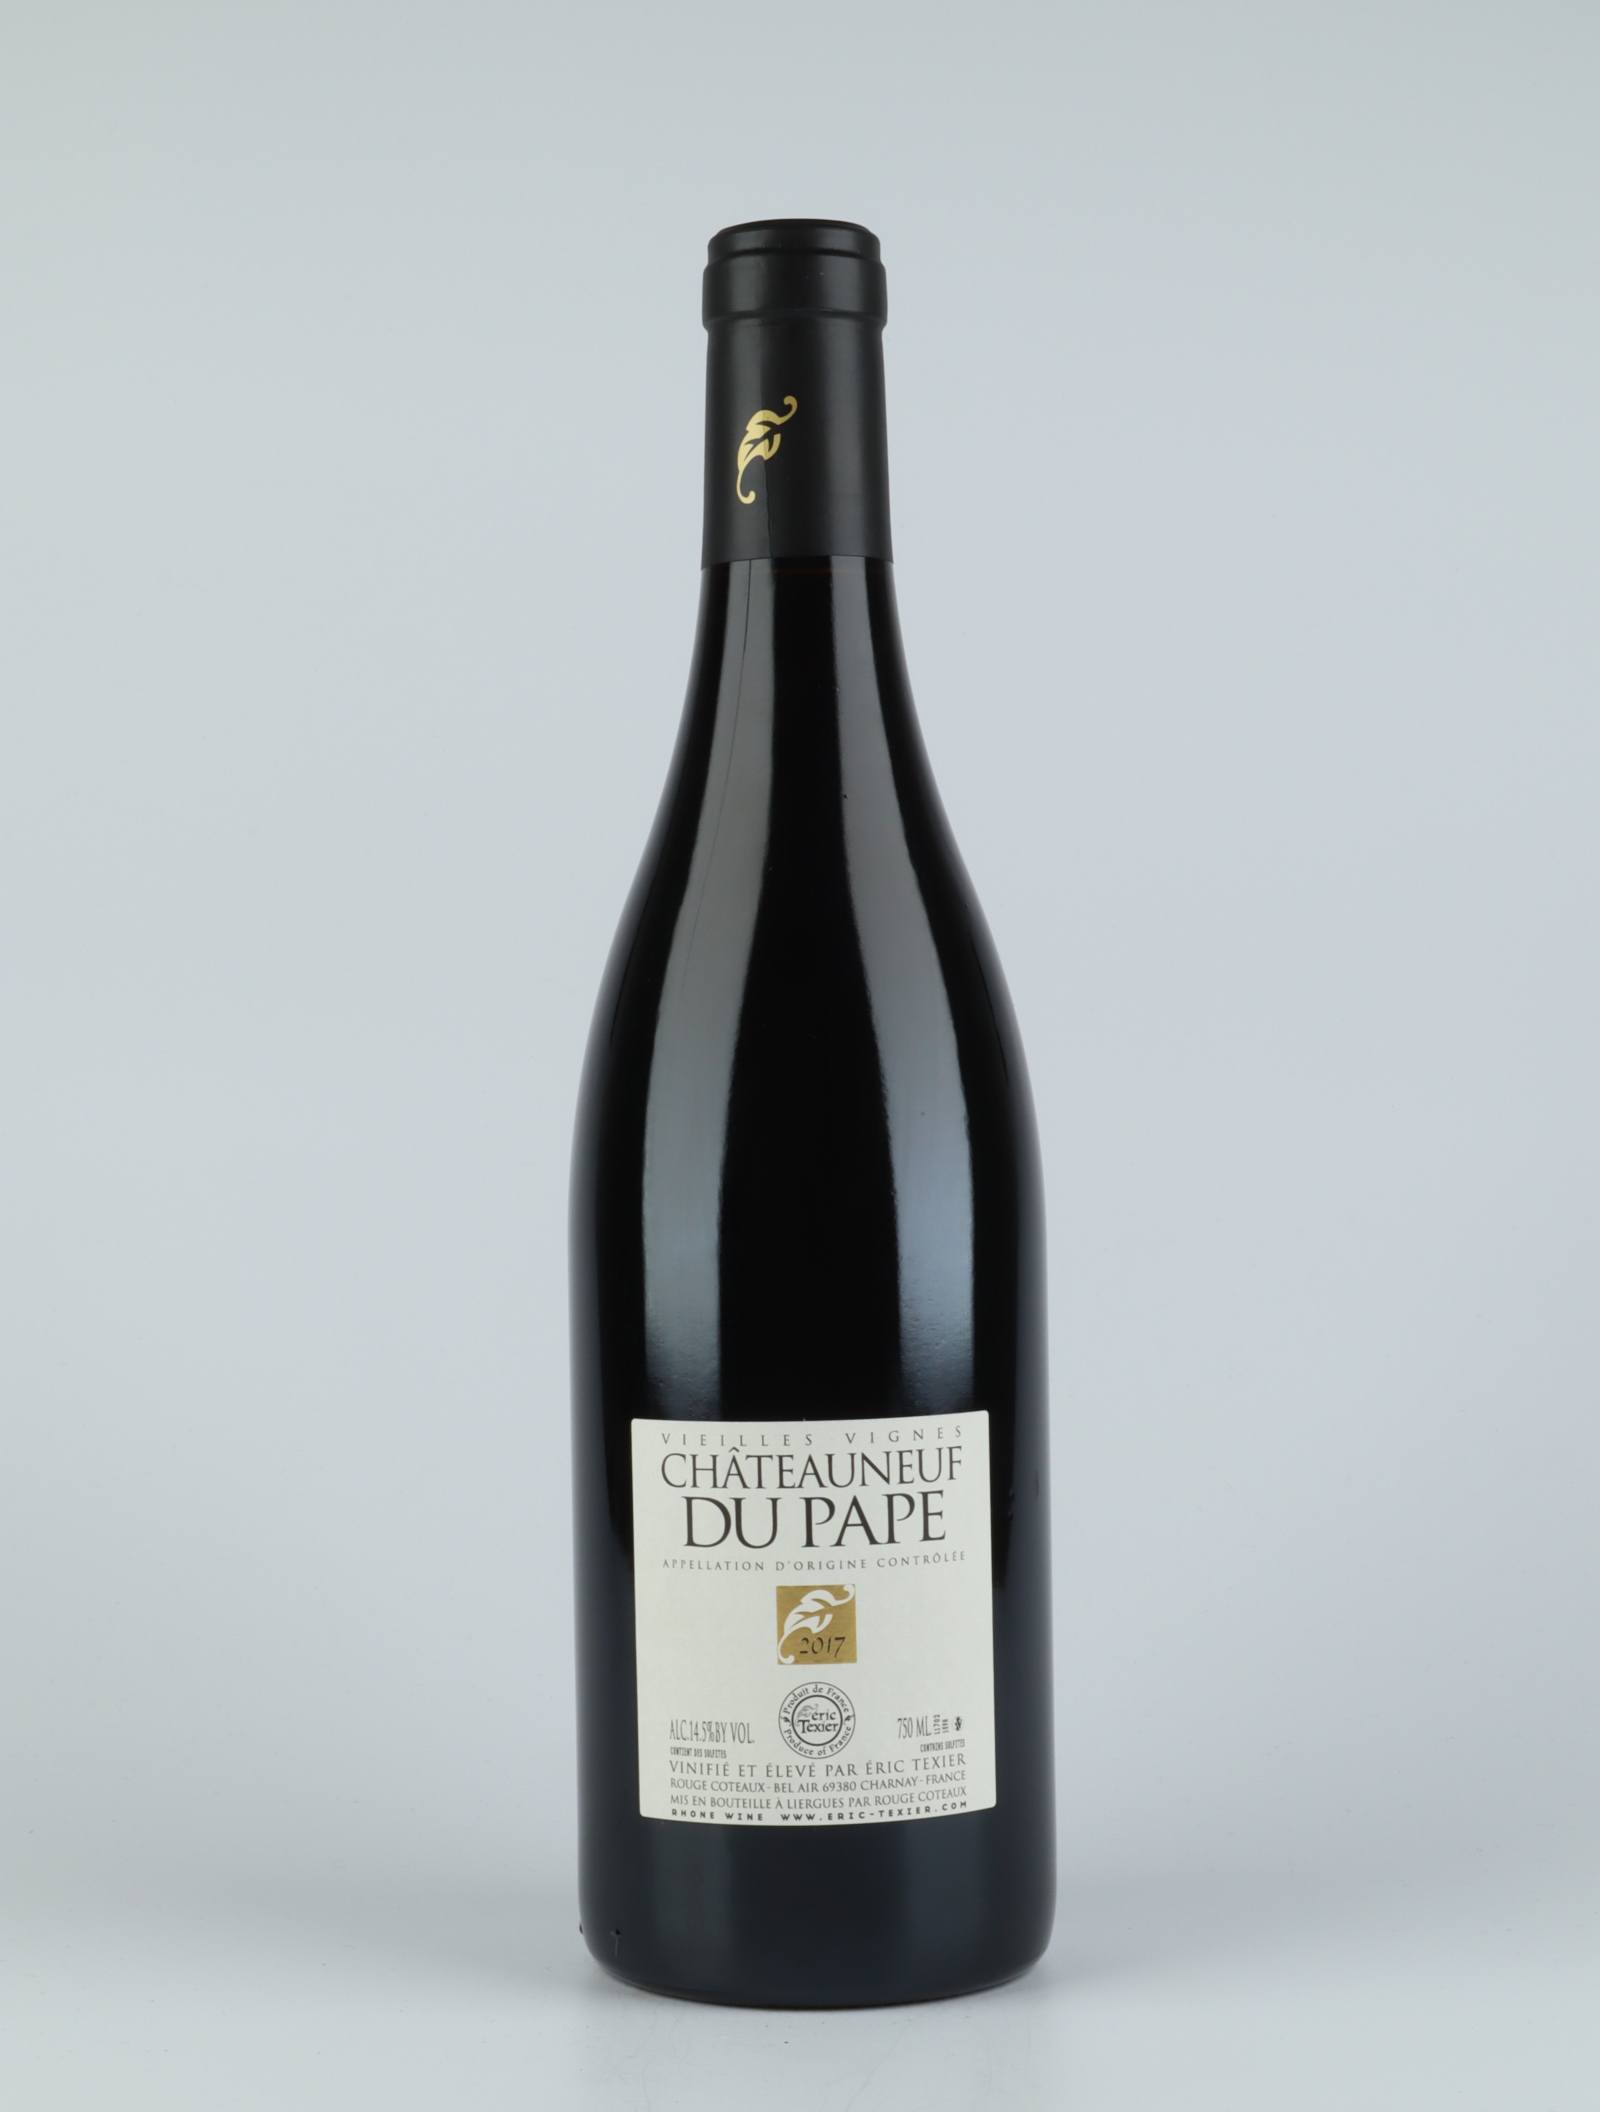 A bottle 2017 Châteauneuf-du-pape V.V. Red wine from Eric Texier, Rhône in France